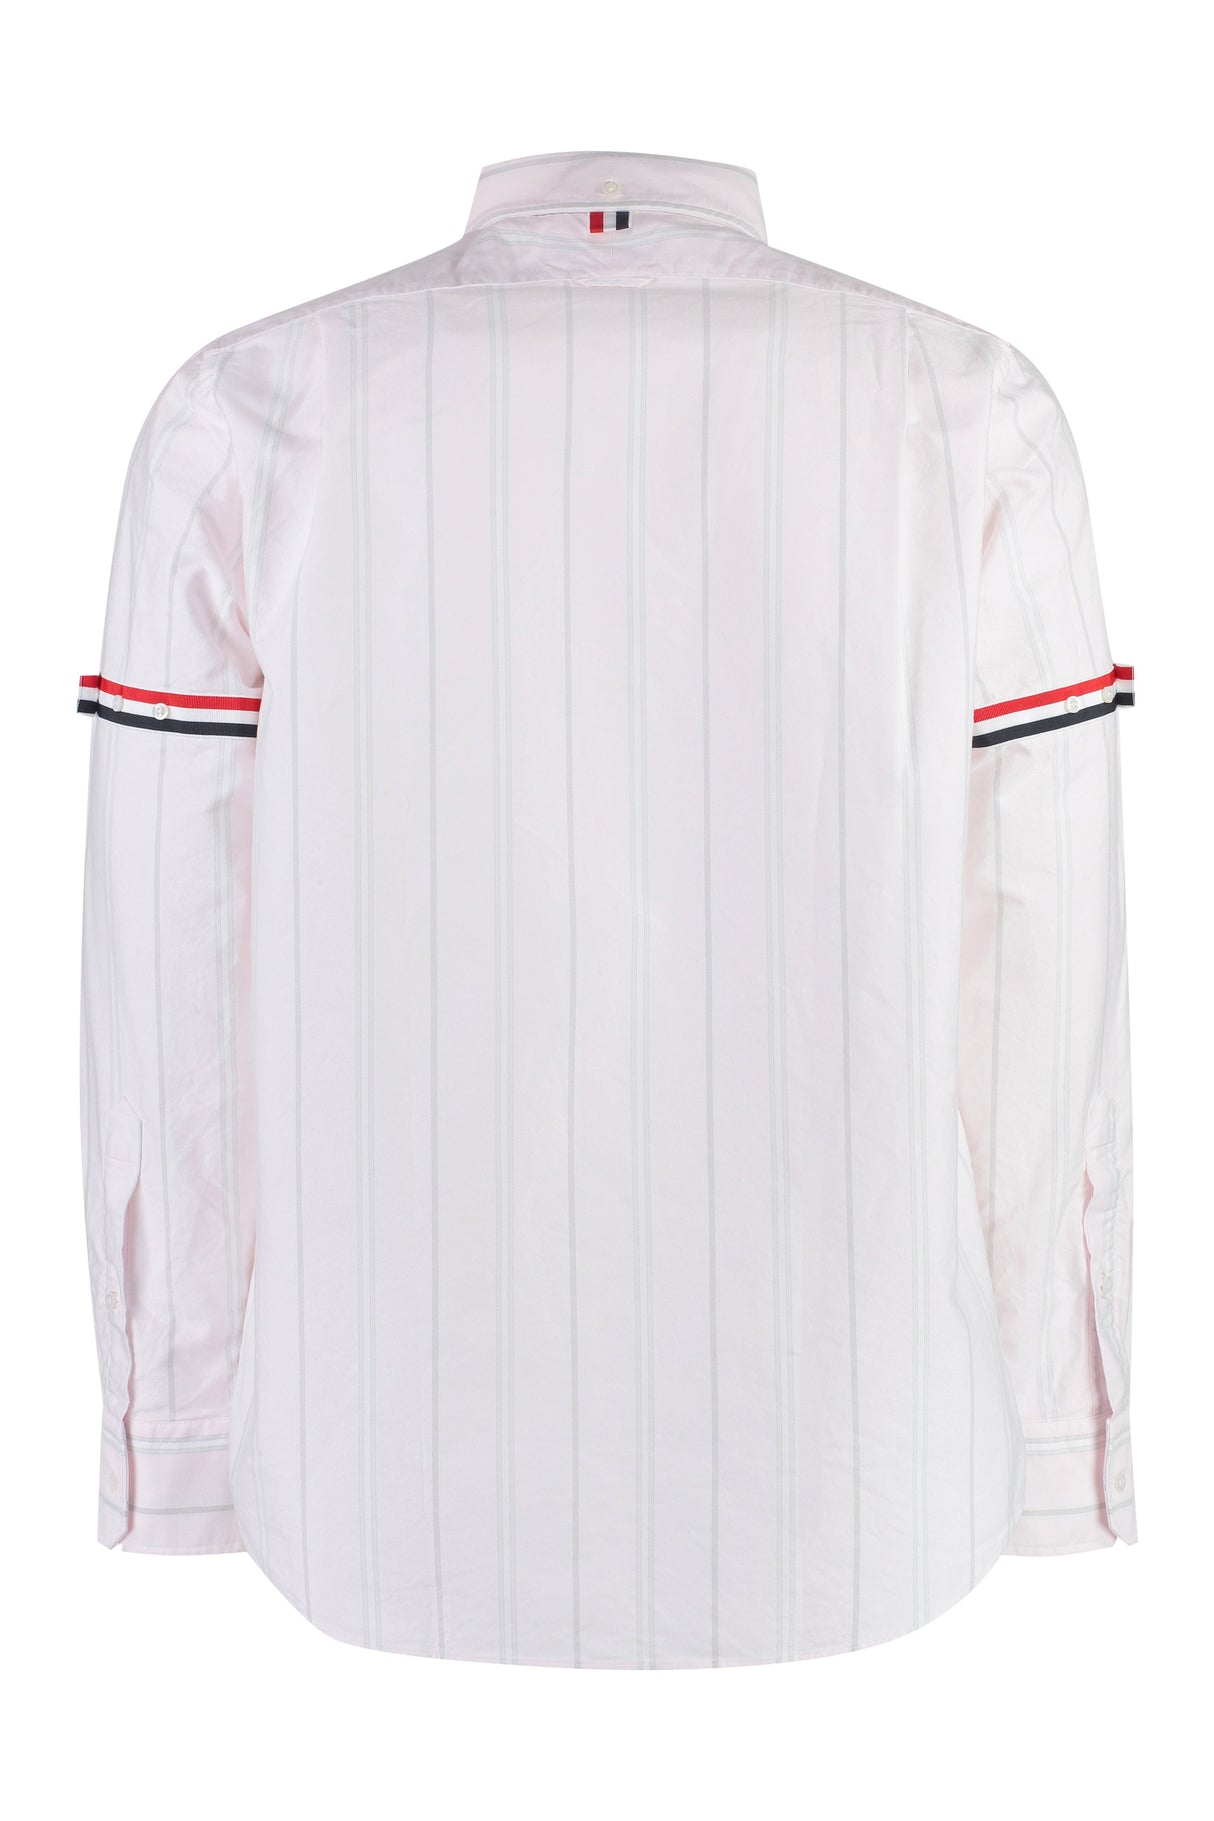 Tricolor Striped Cotton Shirt for Men - FW23 Collection